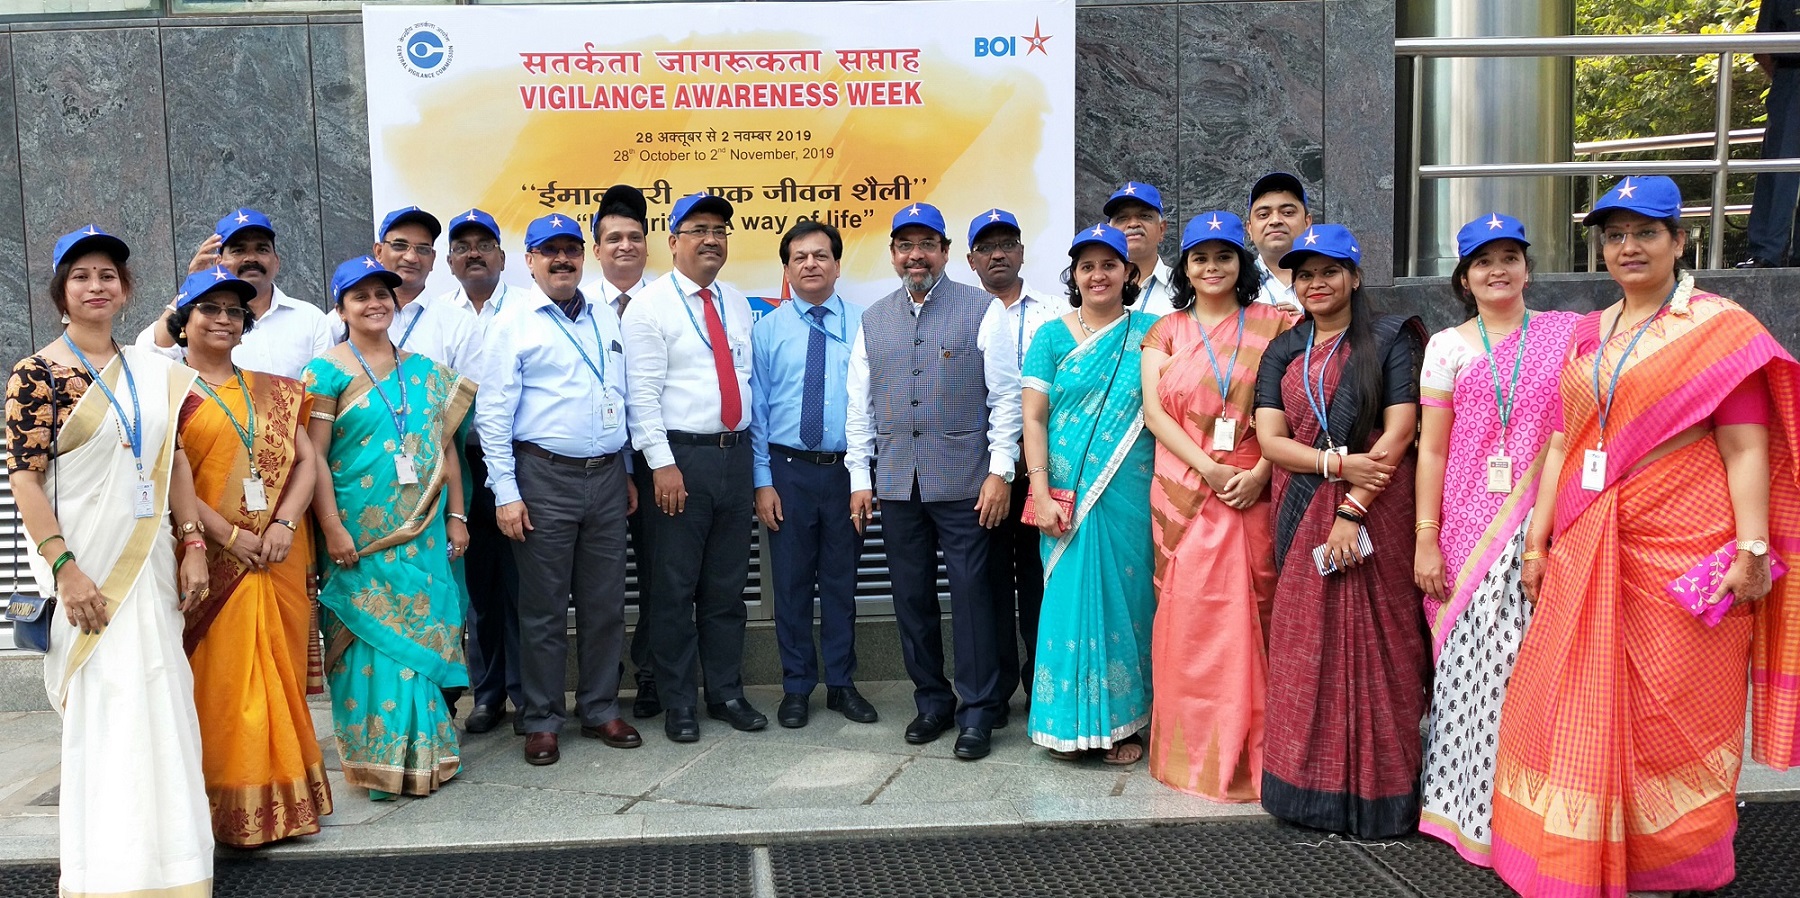 Shri Devendra Sharma, Chief Vigilance Officer, Bank of India along with other bank of India officials on the occasion of Vigilance Awareness Week at BKC Mumbai -Photo By Sachin Murdeshwar GPN